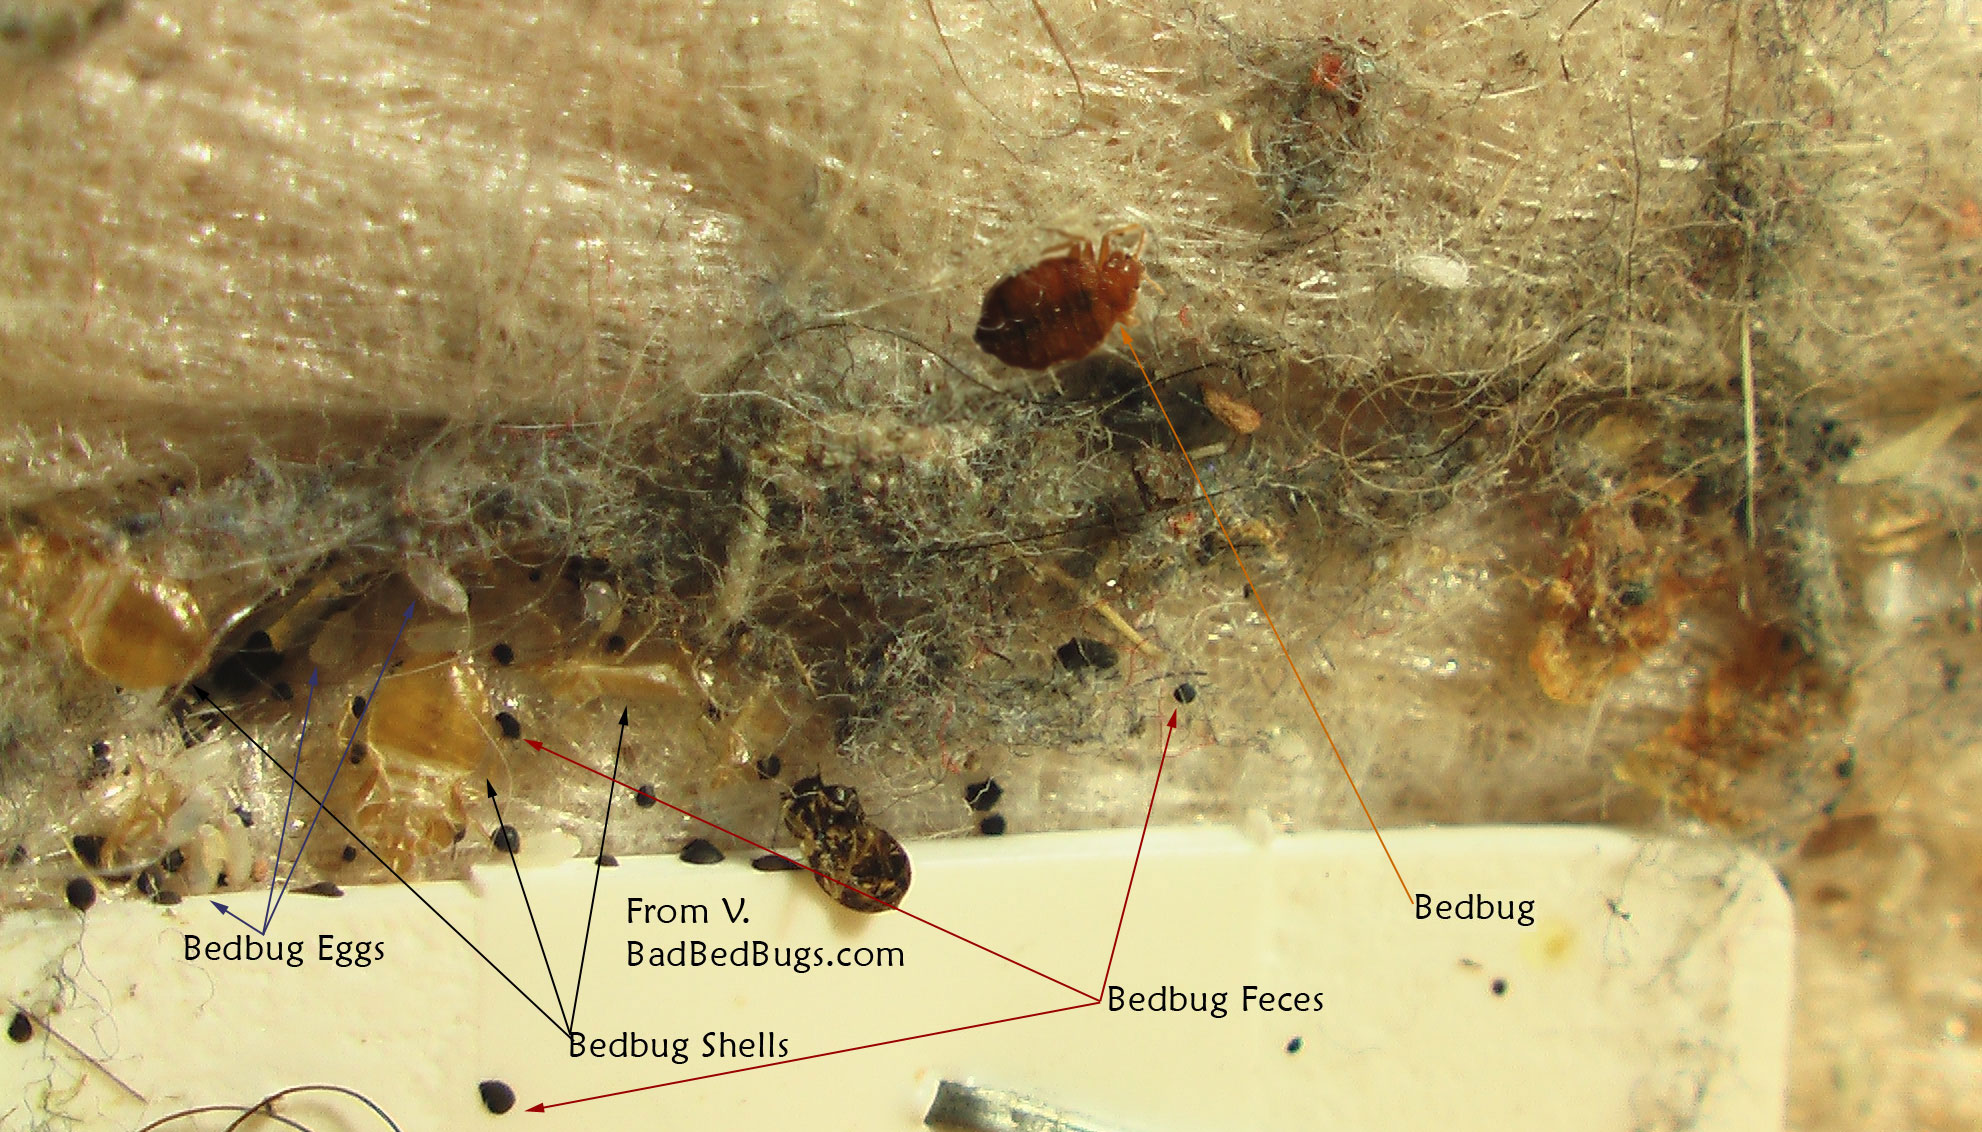 Carpet Beetle Bites Vs Bed Bug Bites Bed bugs and their eggs